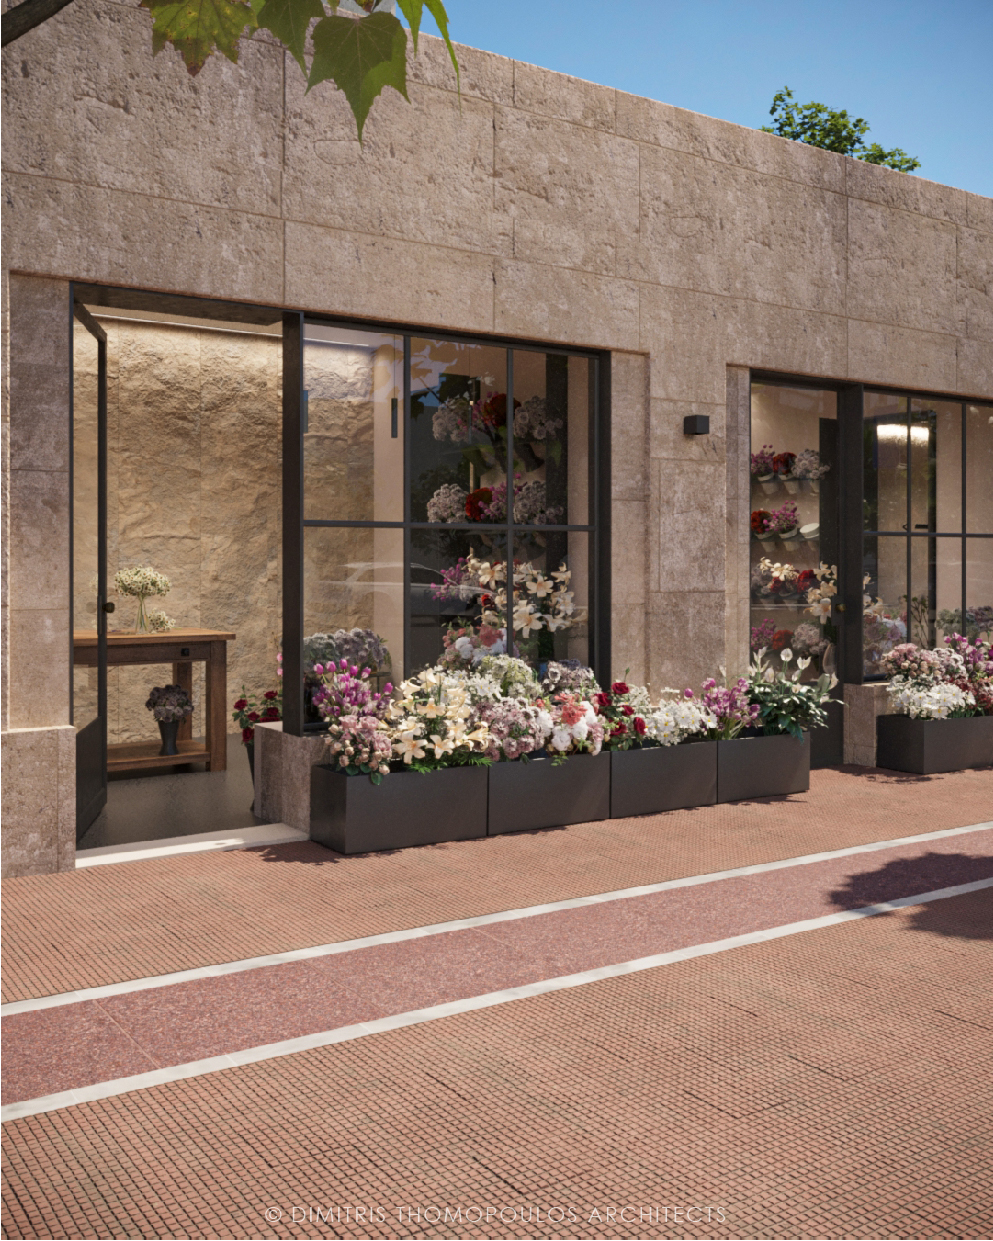 The revival of the historic Syntagma flower shops